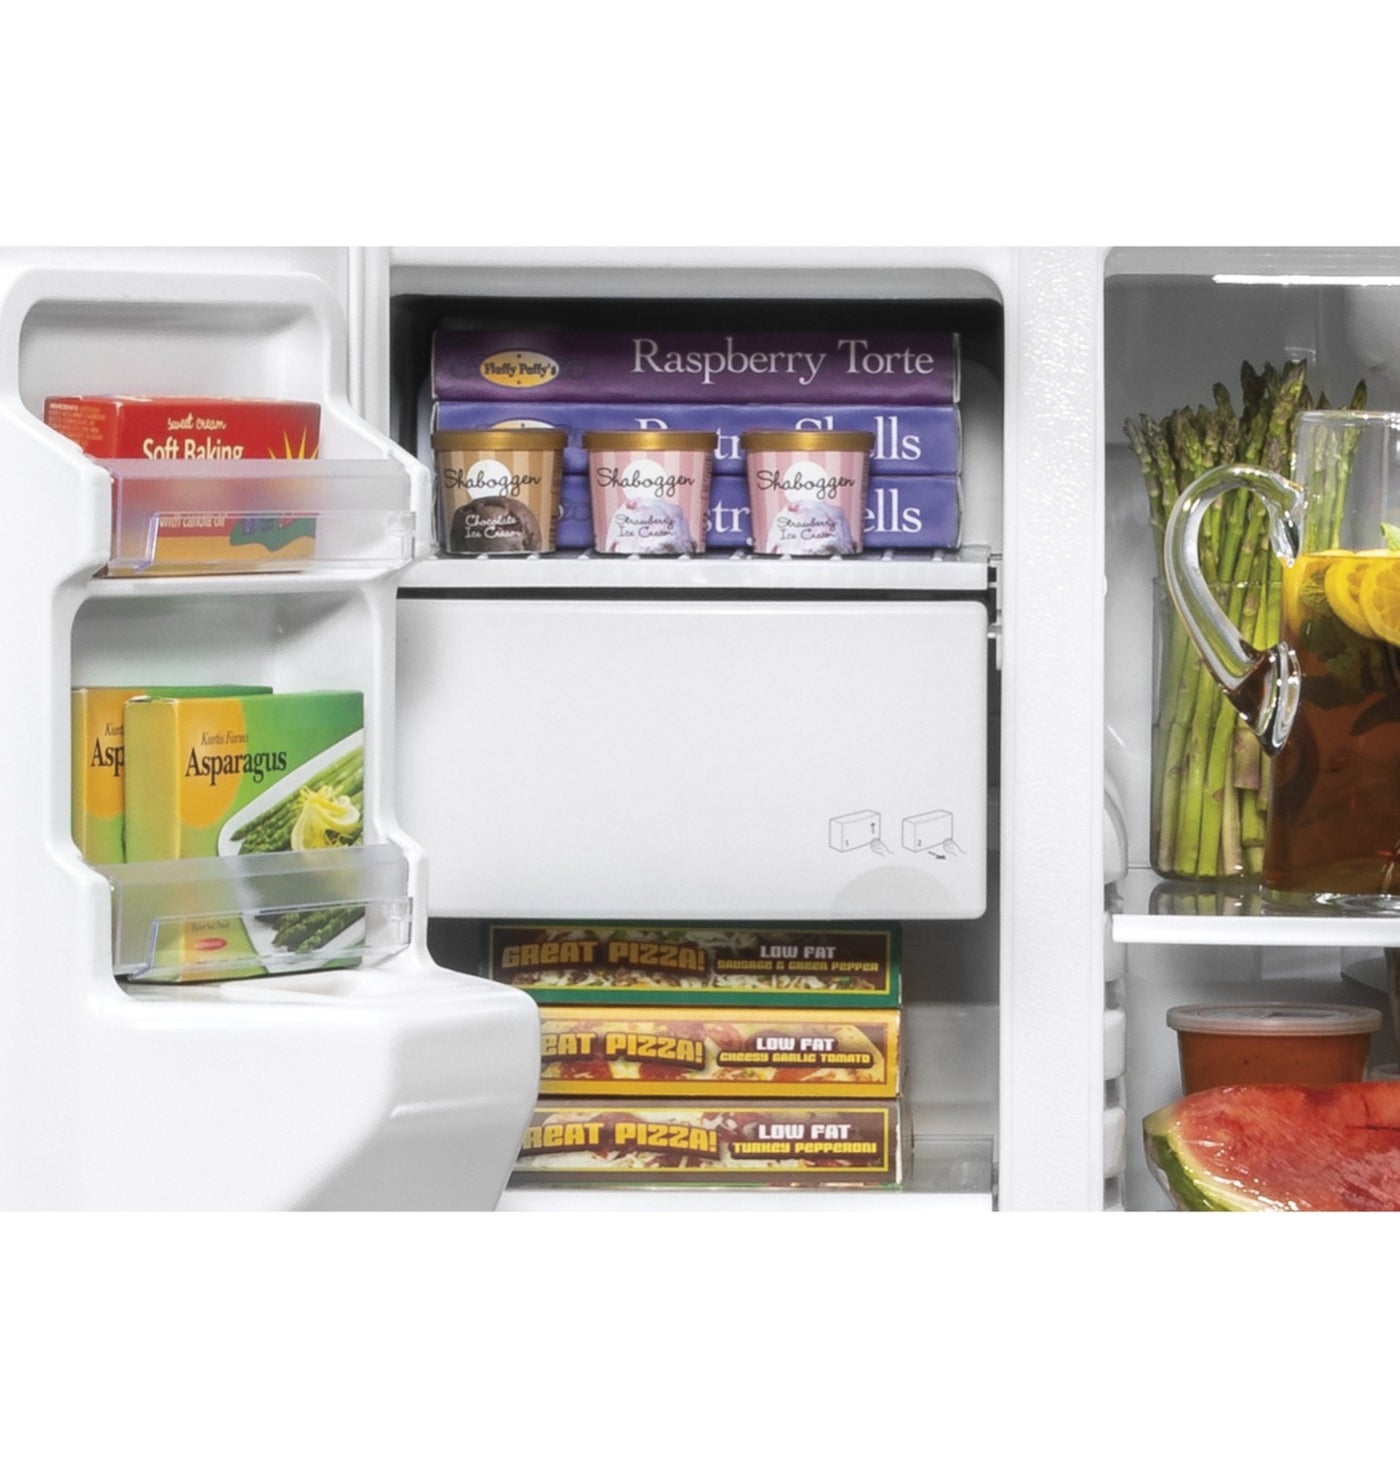 GE Stainless Steel Side-By-Side Refrigerator (25.1 Cu.Ft) - GSS25IYNFS